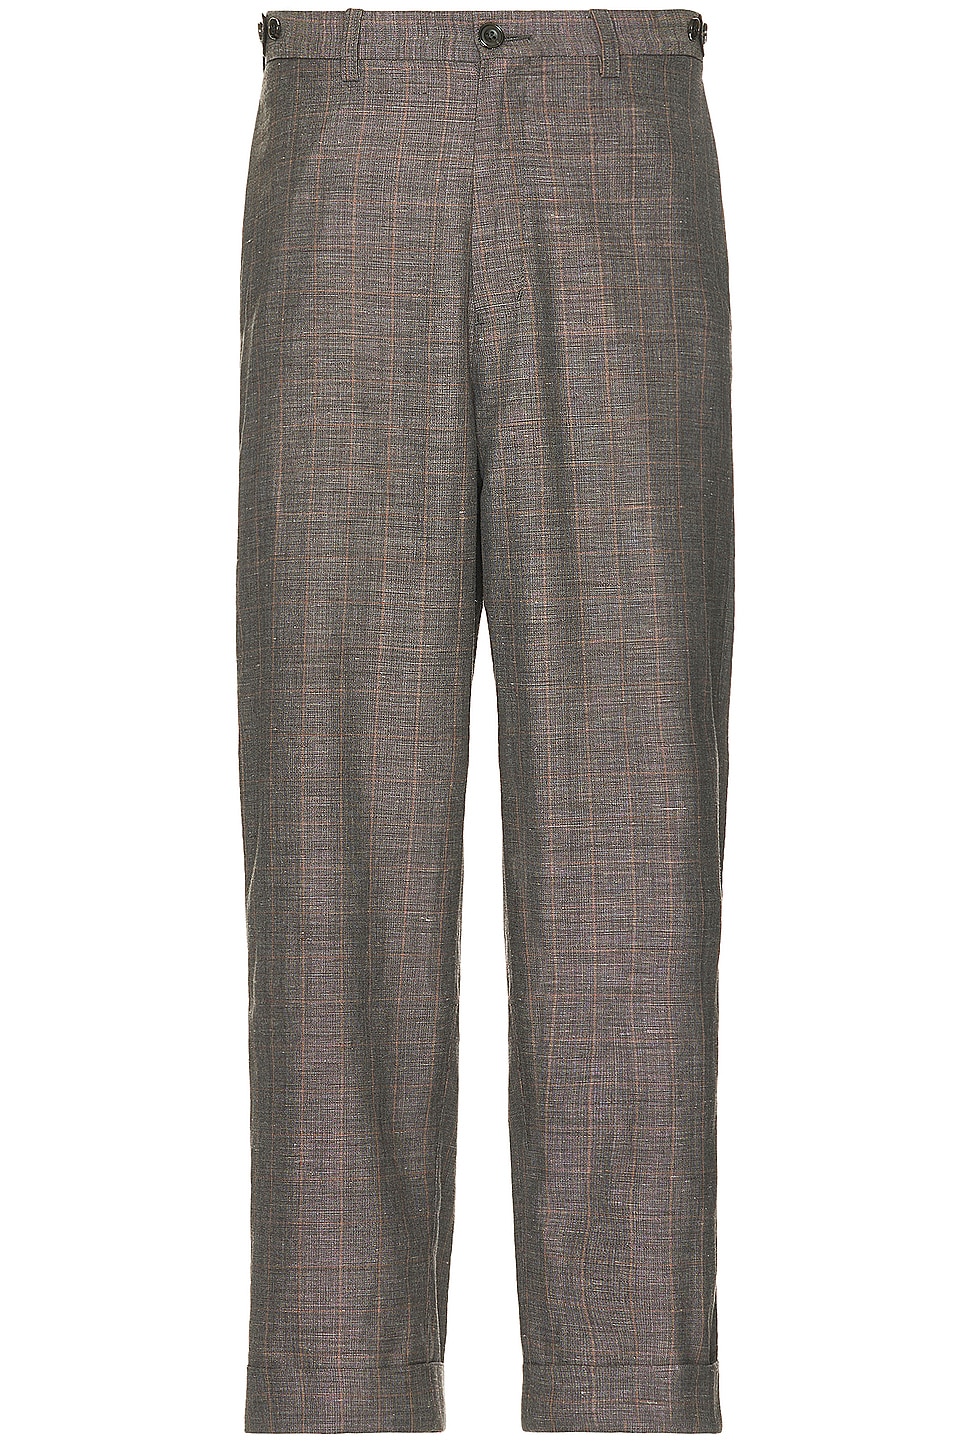 Image 1 of Beams Plus Ivy Trousers Wide Linen Plaid in Brown